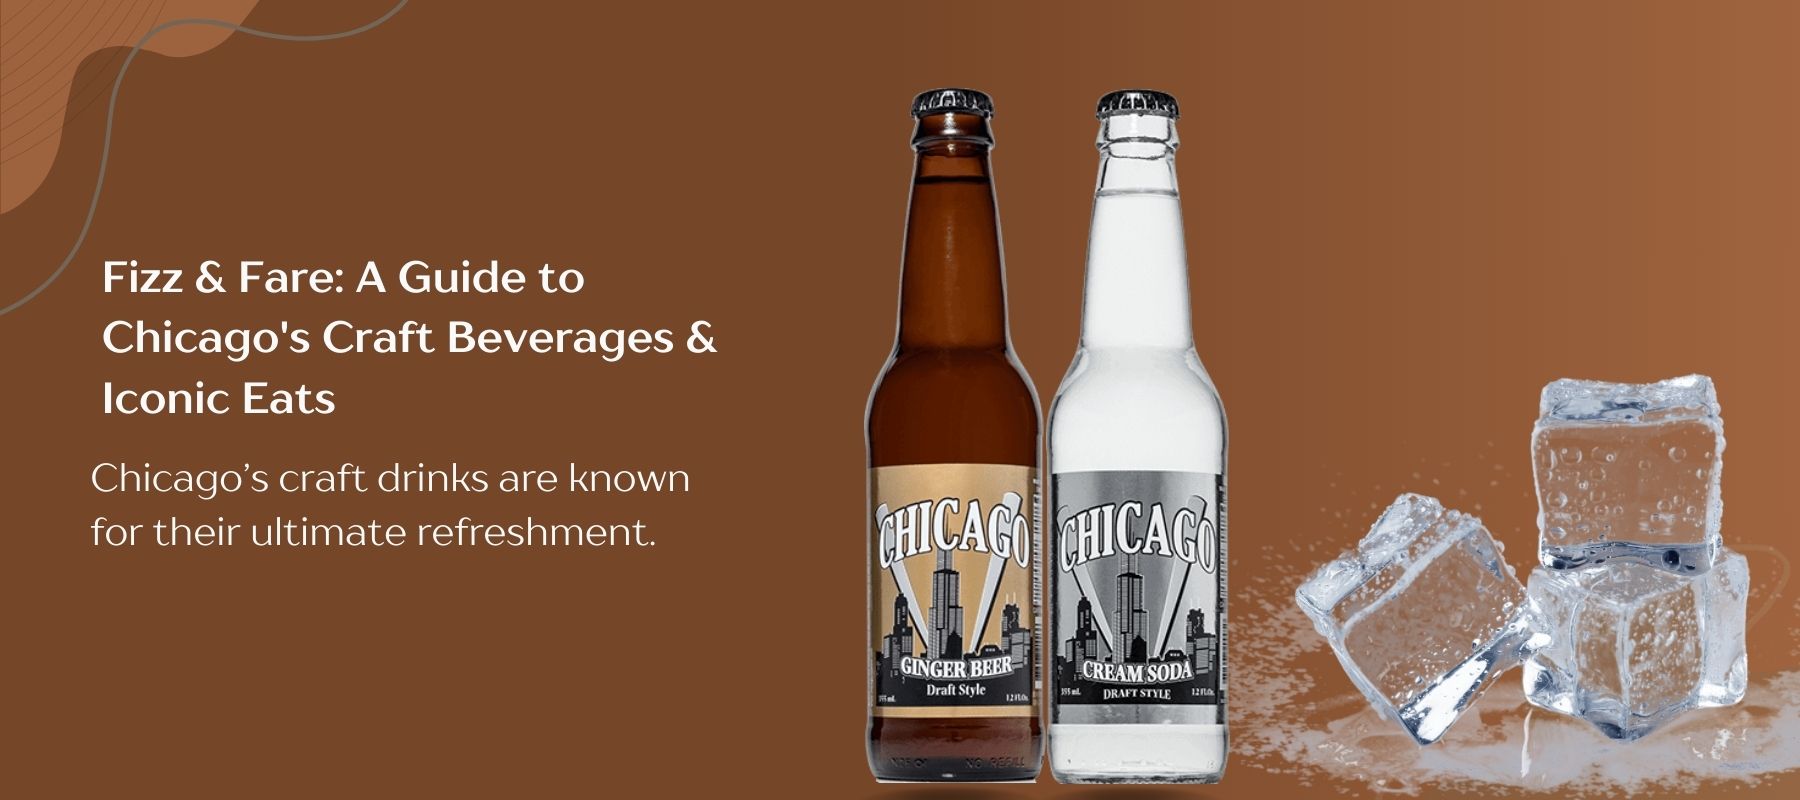 You are currently viewing Fizz & Fare: A Guide to Chicago’s Craft Beverages & Iconic Eats